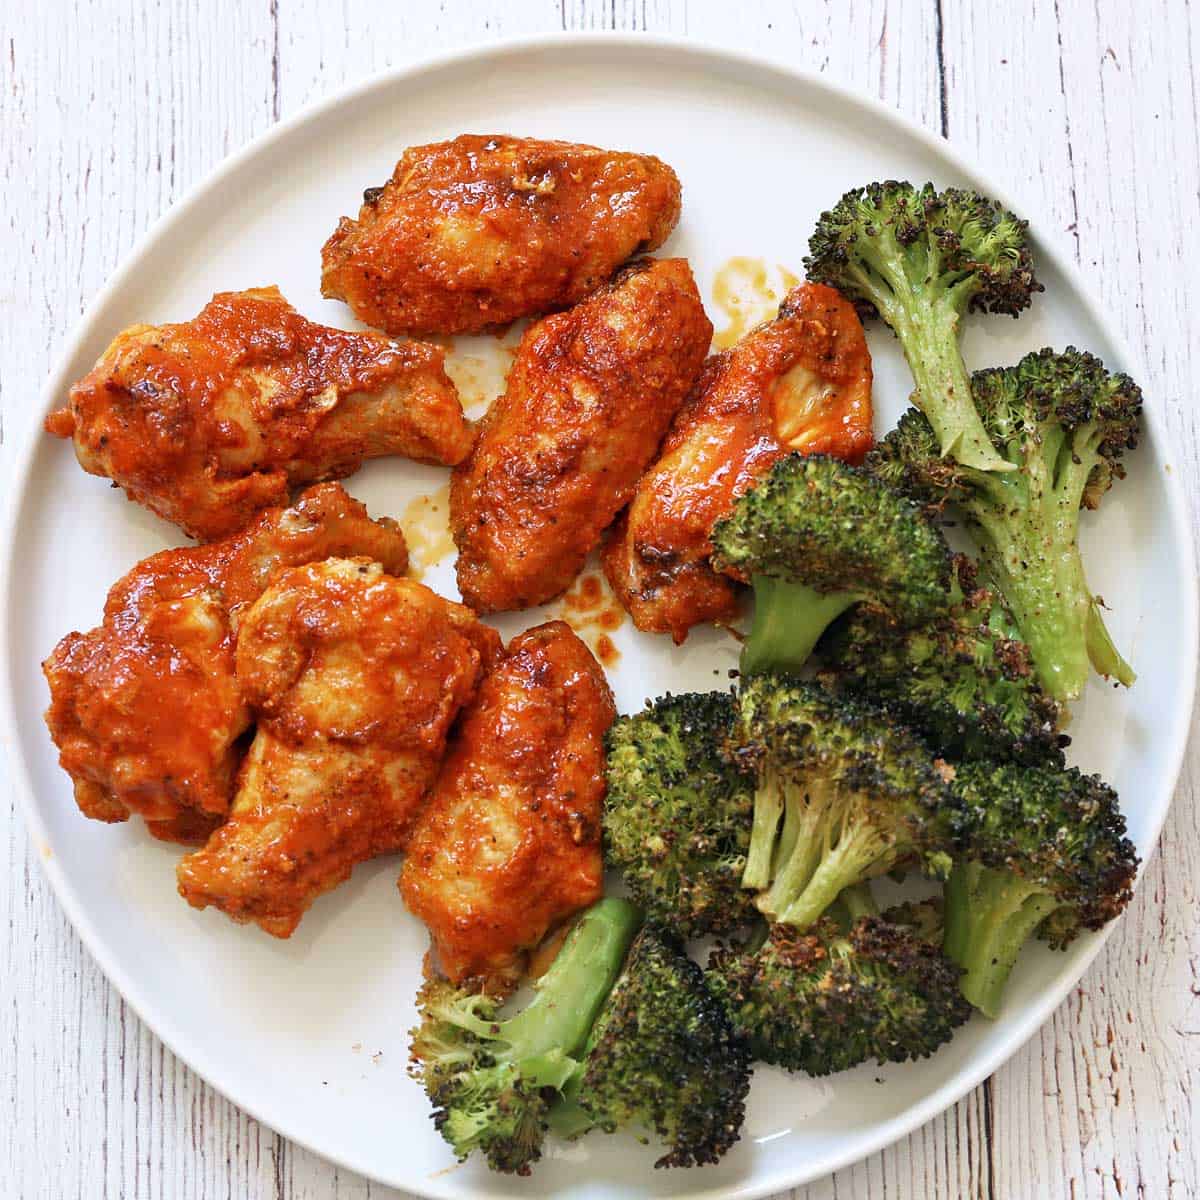 Buffalo wings are served with a side of roasted broccoli.